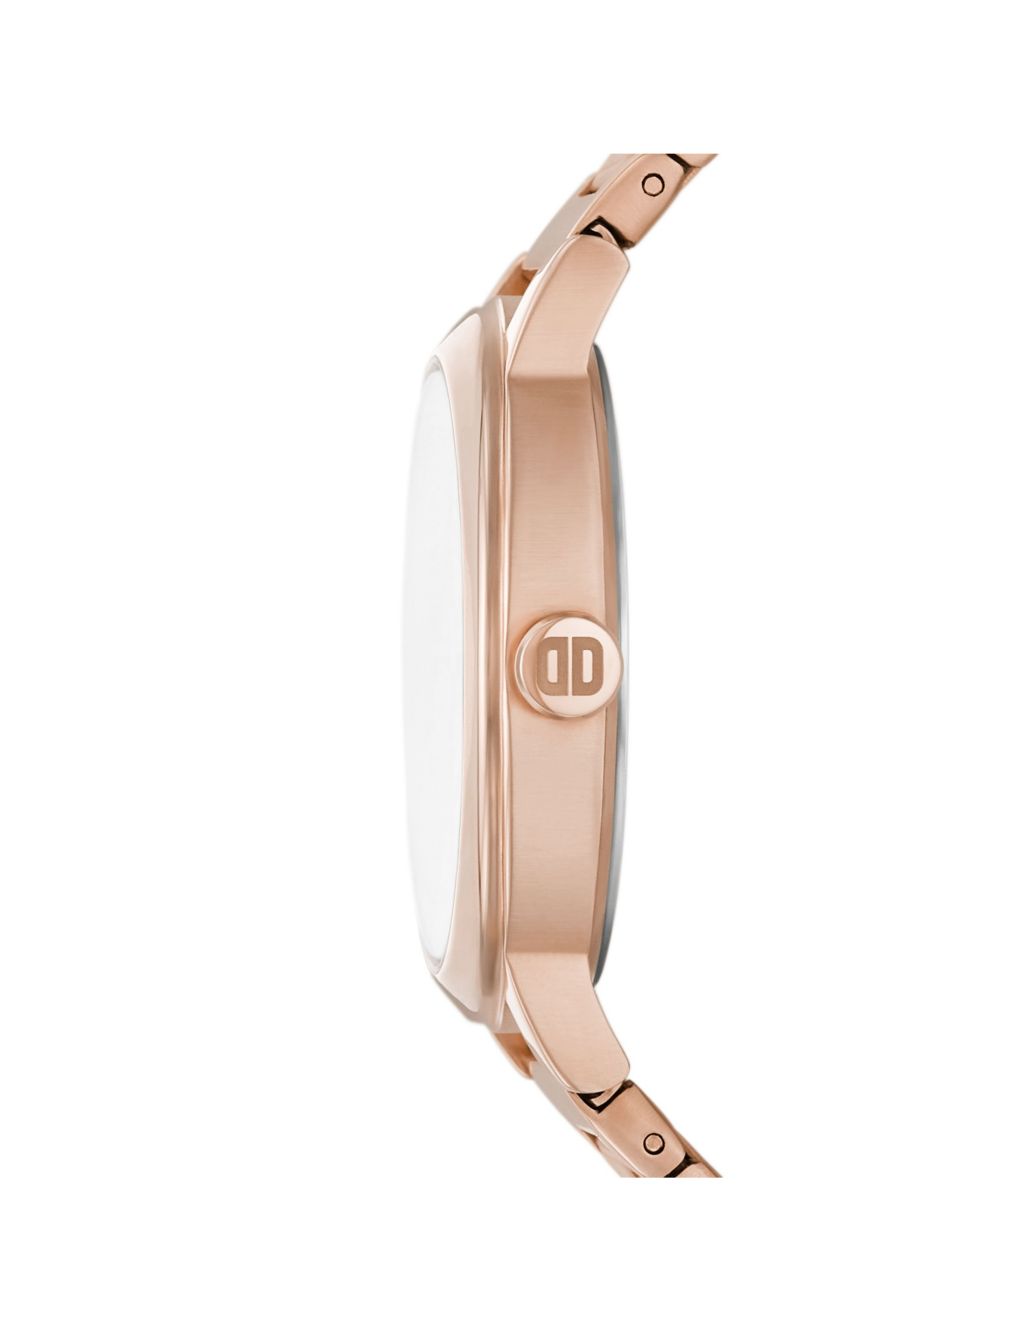 DKNY 7th Avenue Rose Gold Stainless Steel Watch image 2